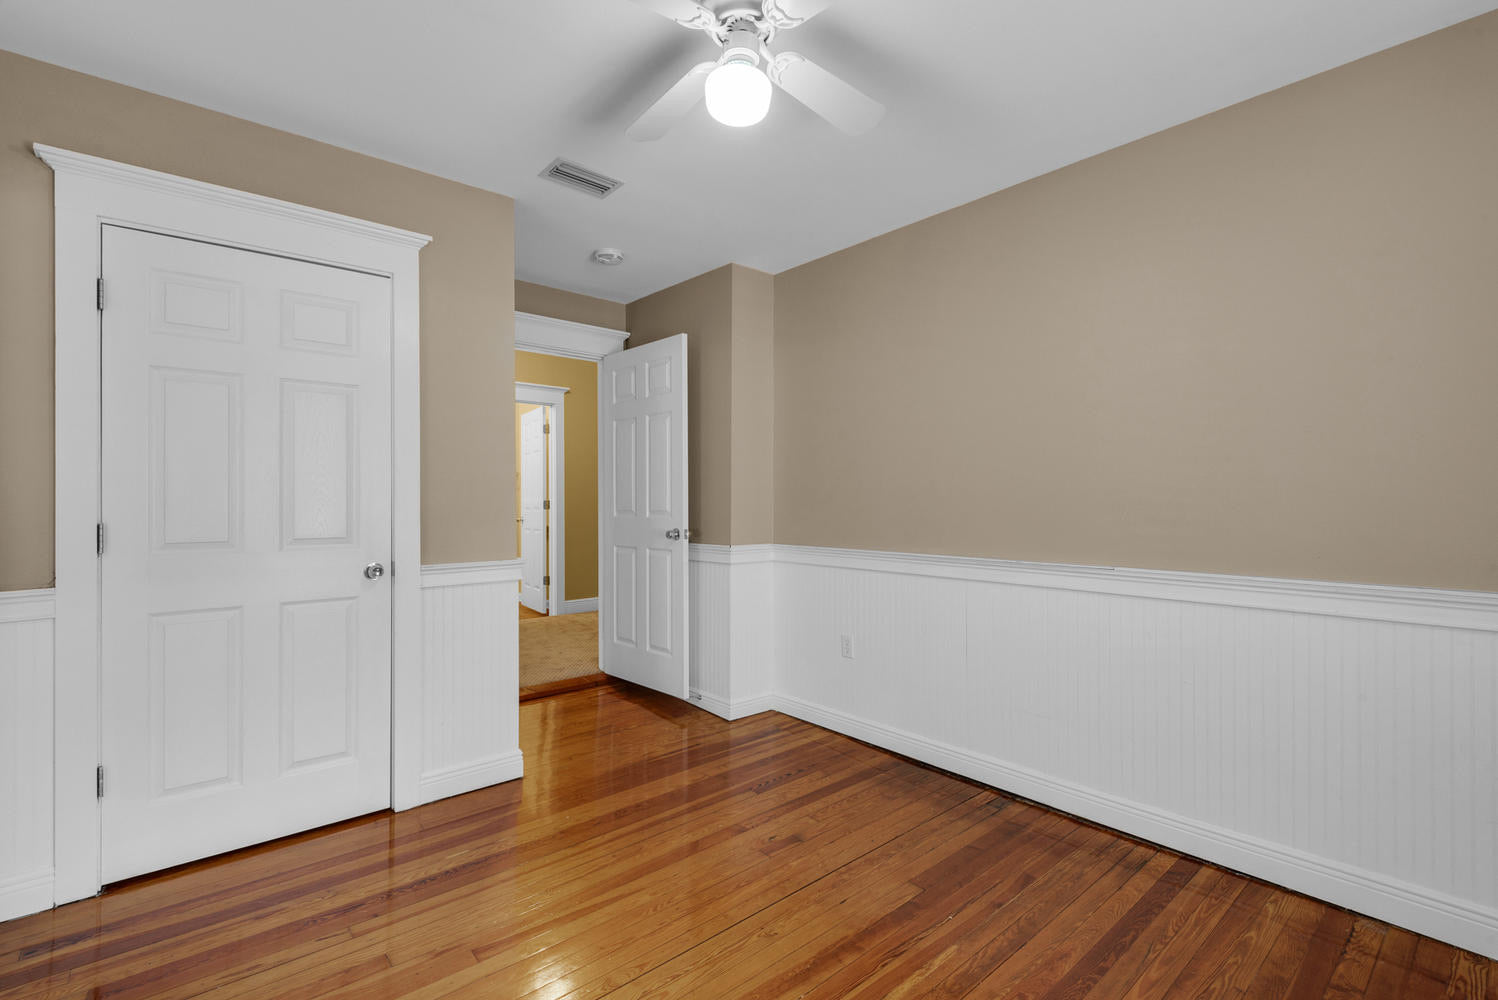 Empty room with wooden floors and tan walls with white wainscoting